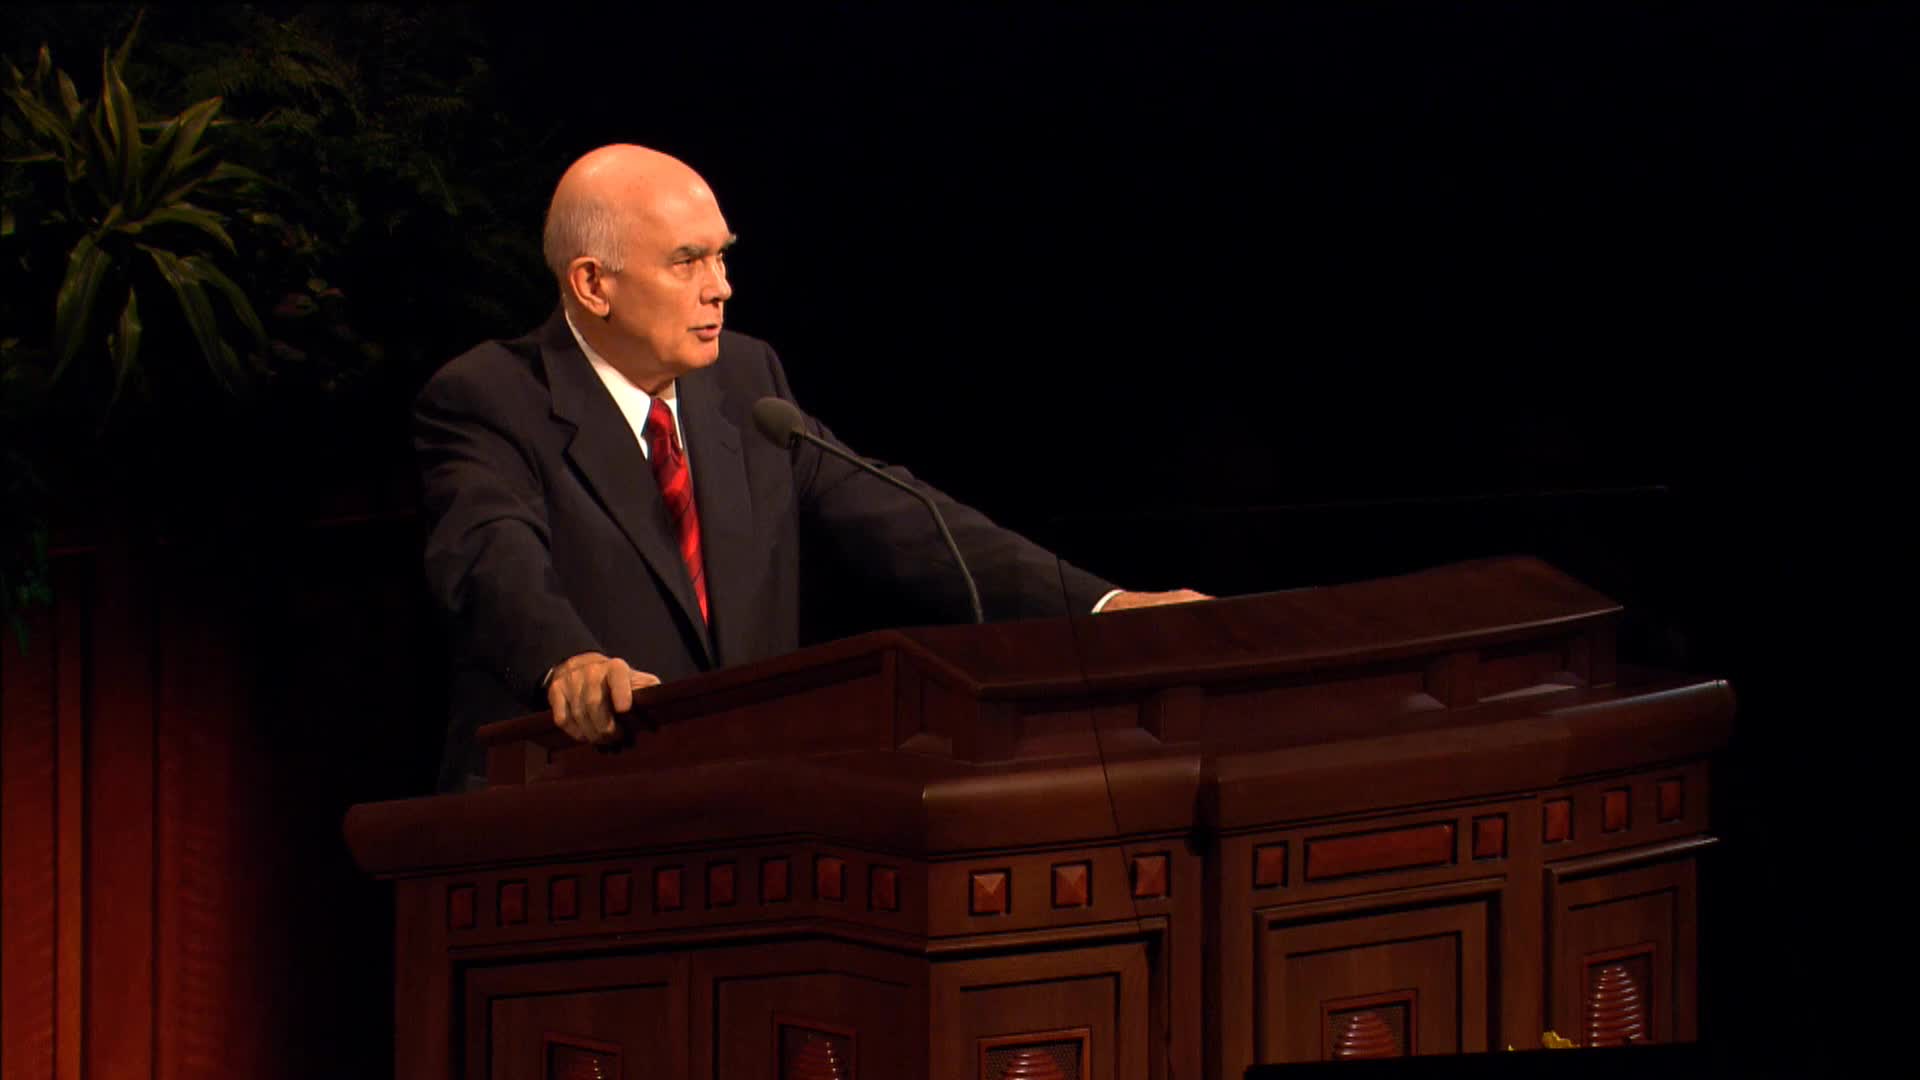 A photo of Elder Dallin H. Oaks standing at the pulpit in the General Conference Center.